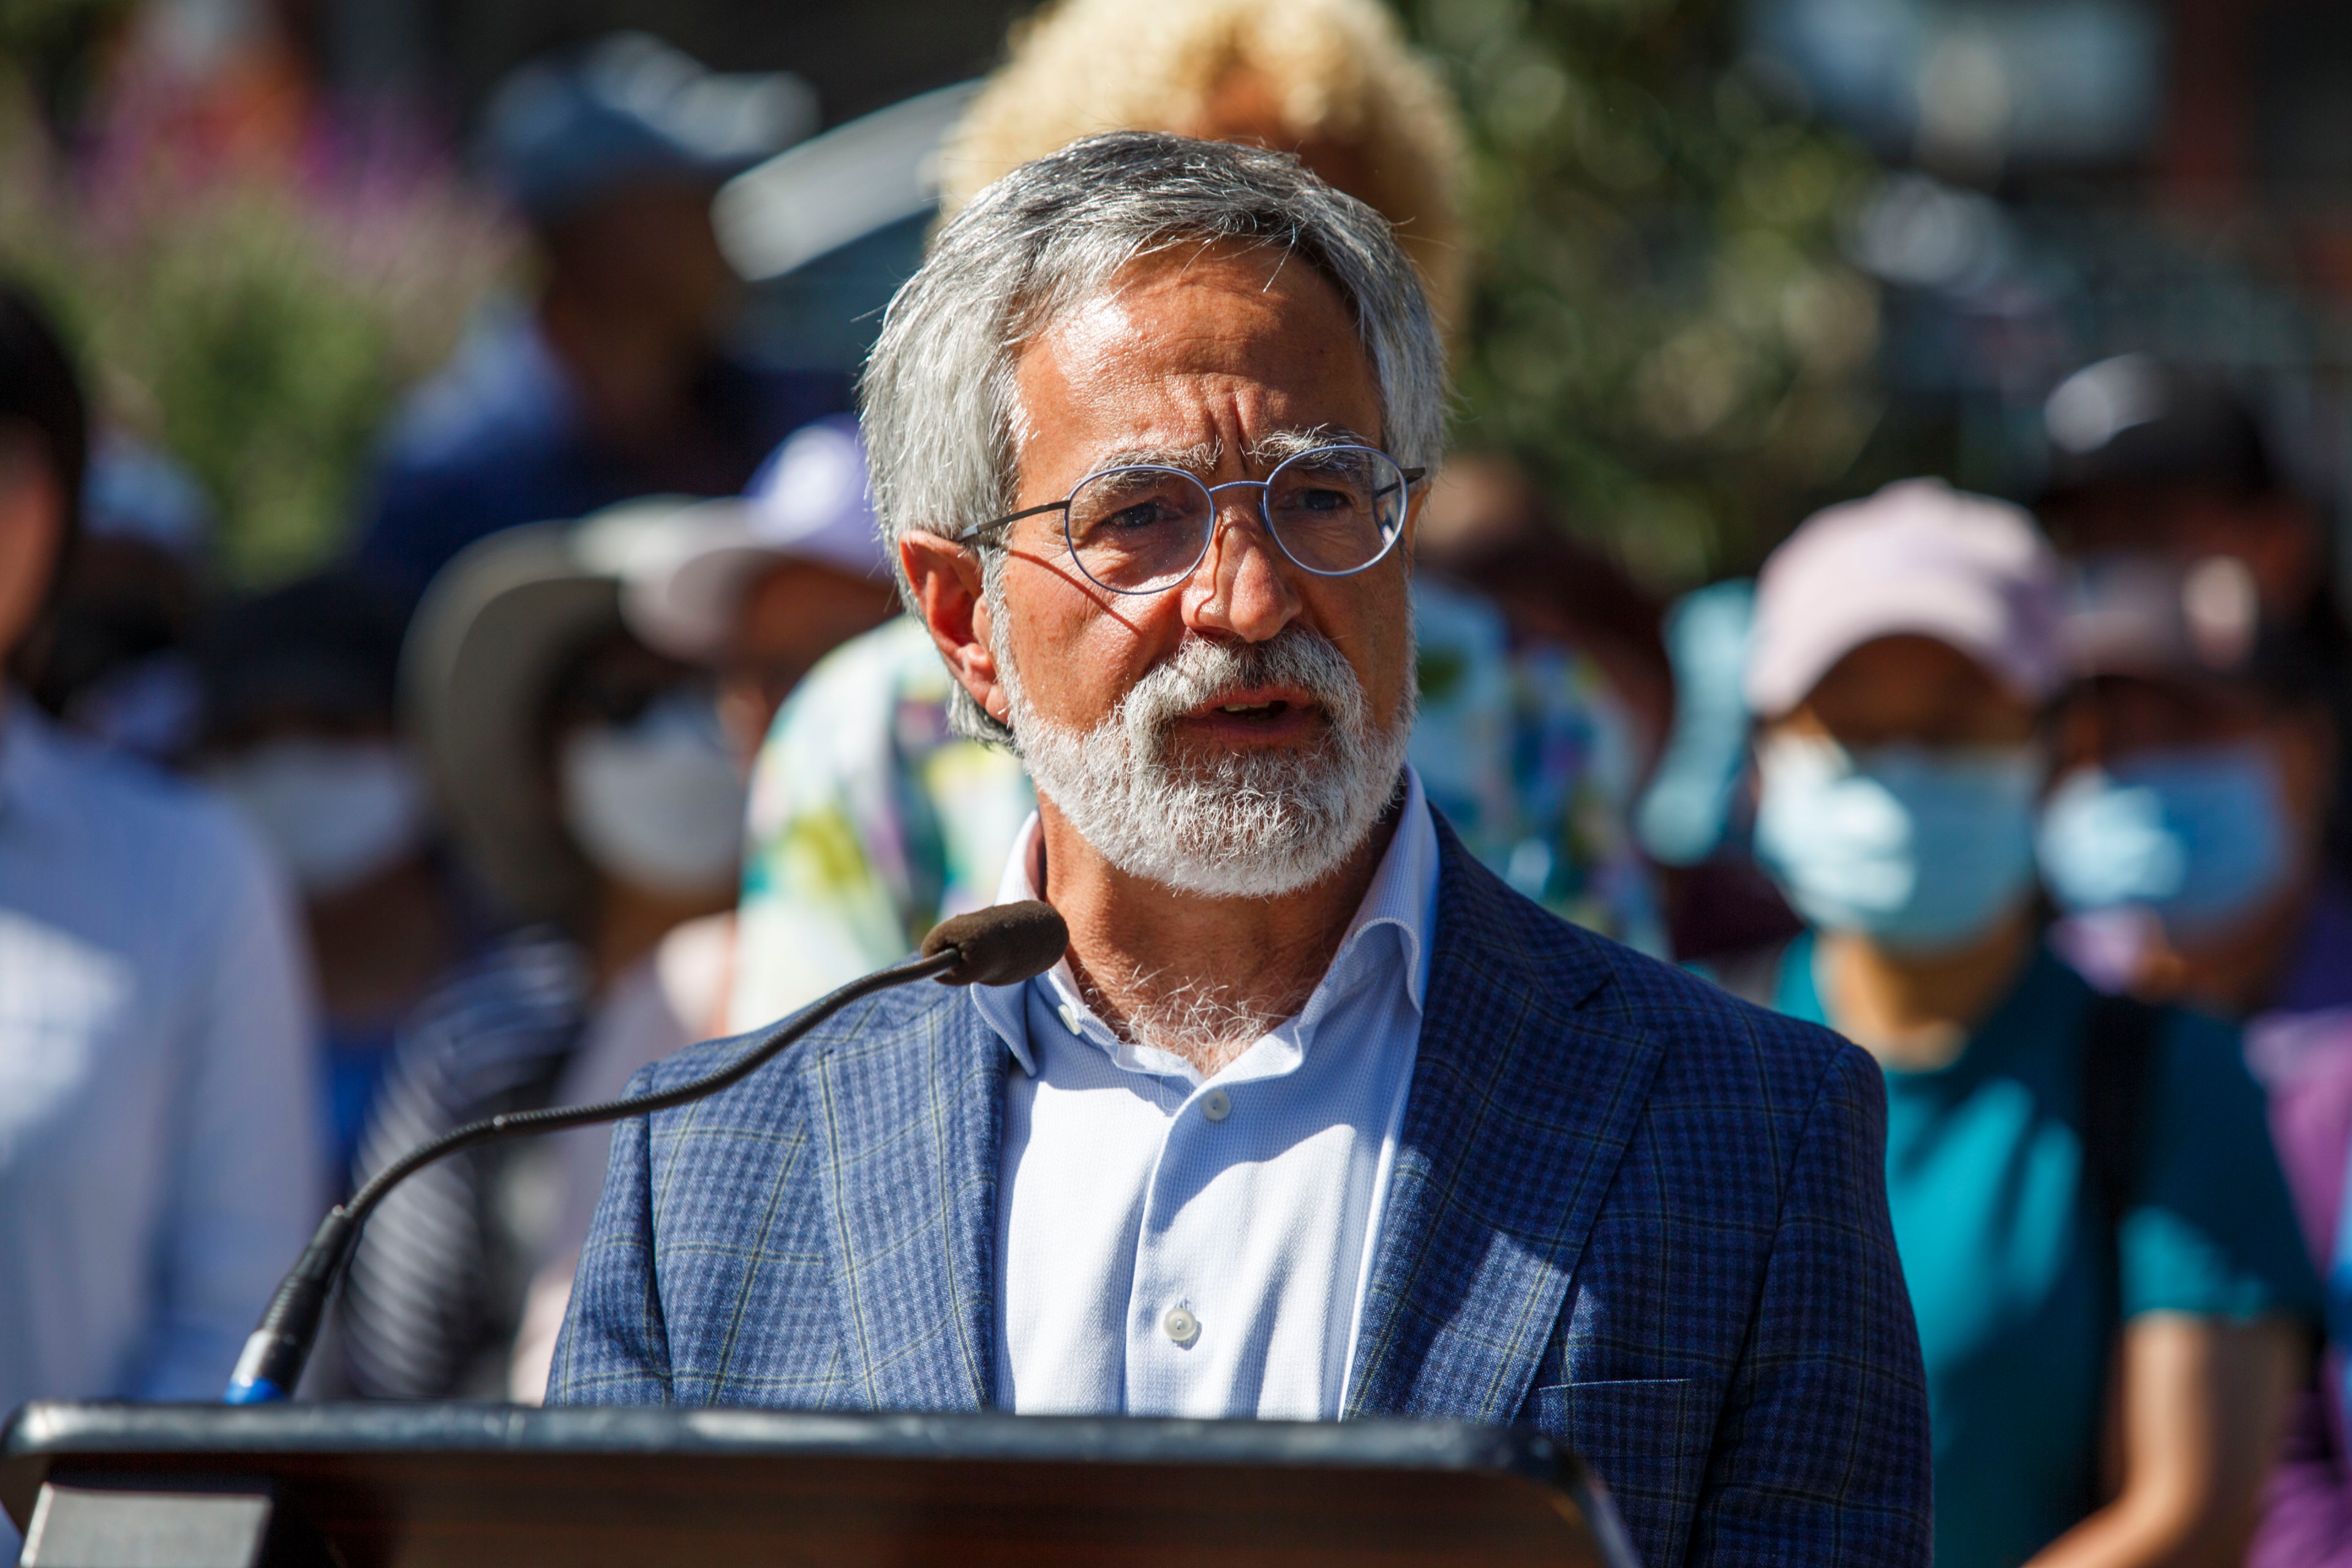 A man with gray hair and beard speaks at a podium outdoors, a crowd with masks in the background.